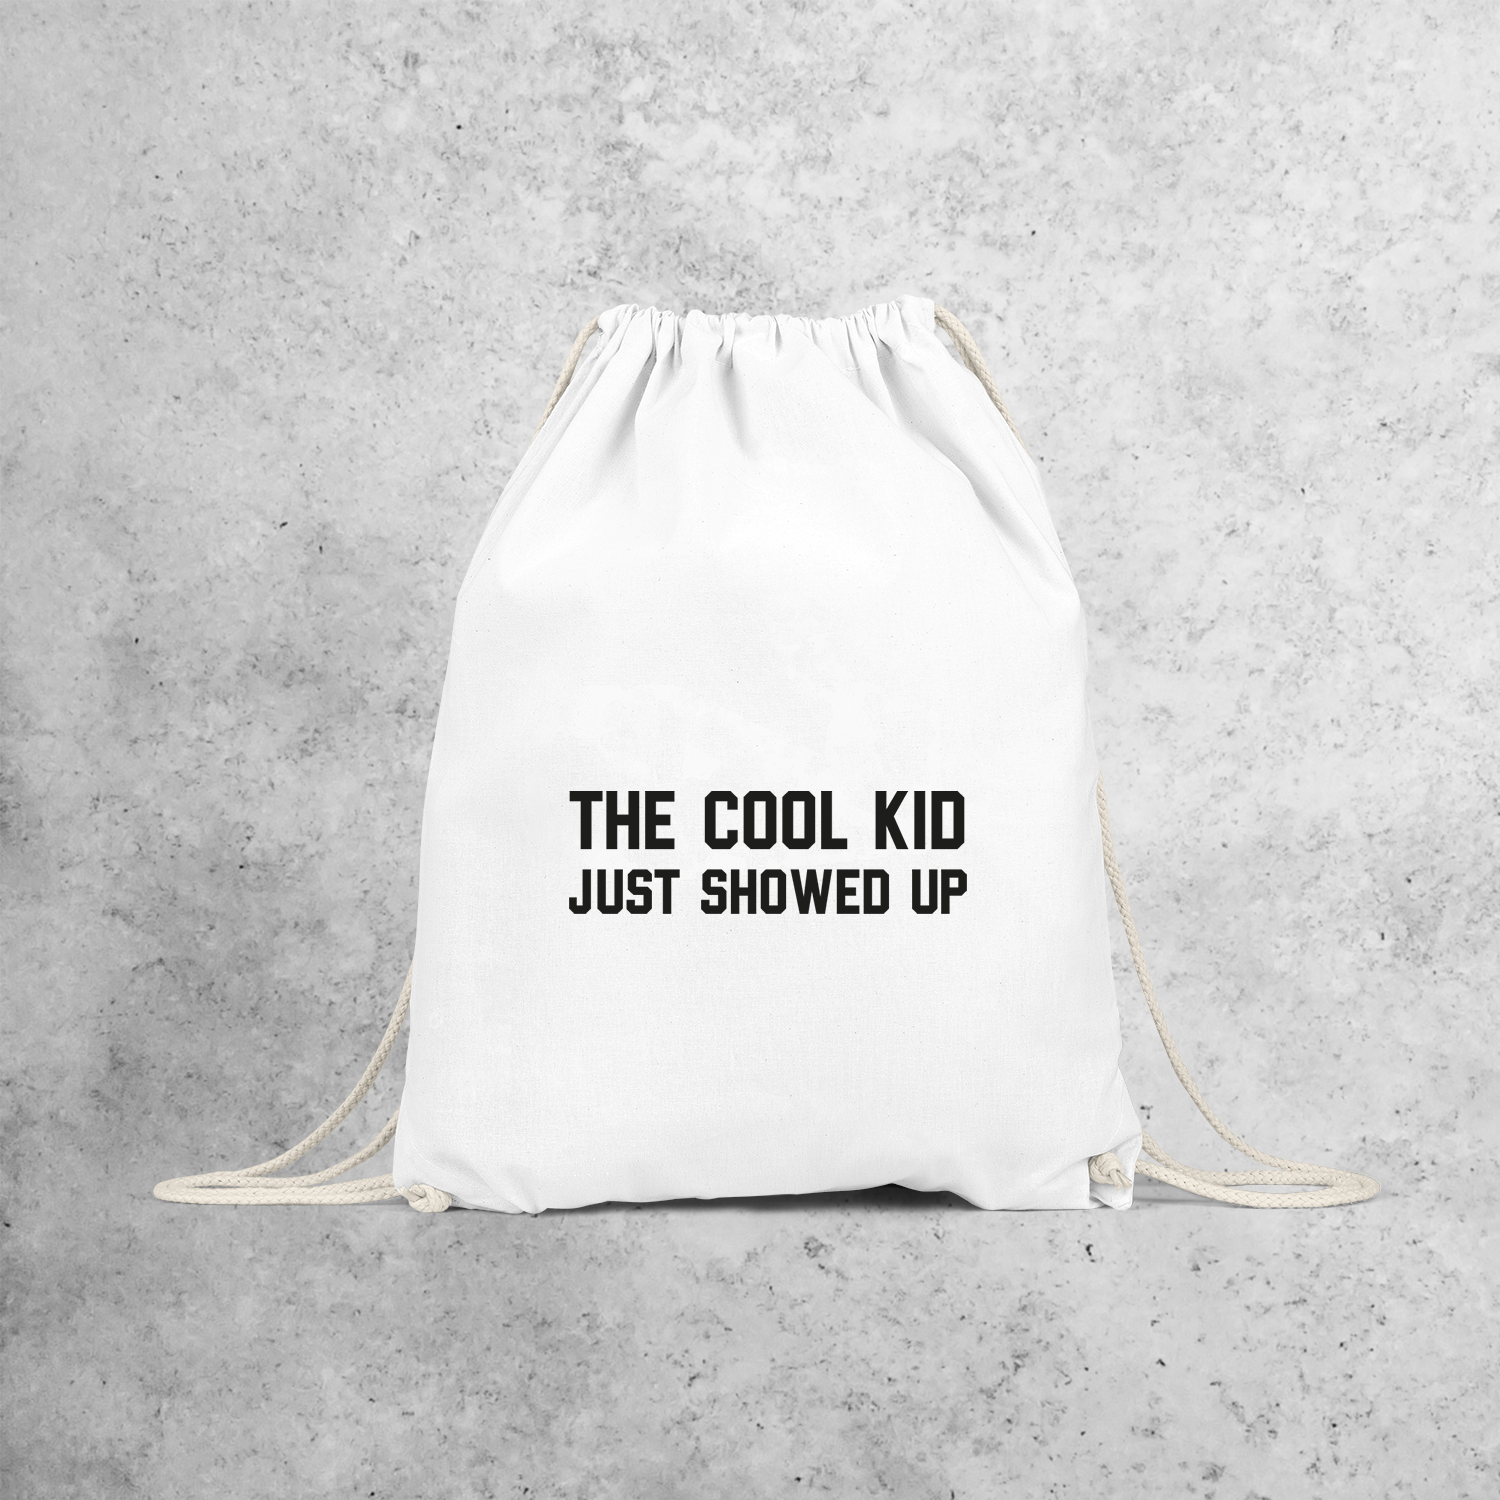 'The cool kid just showed up' backpack